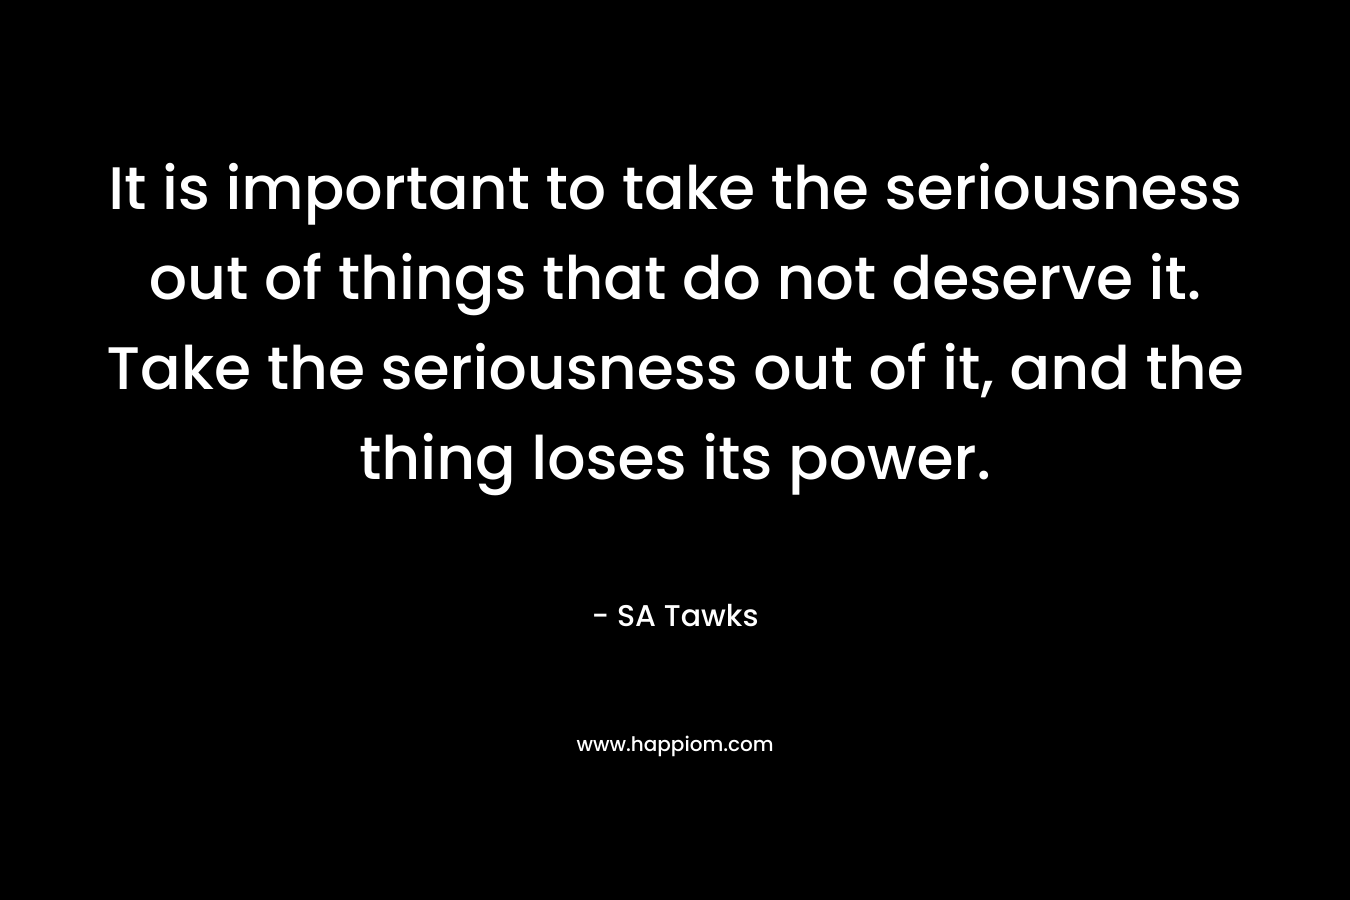 It is important to take the seriousness out of things that do not deserve it. Take the seriousness out of it, and the thing loses its power. – SA Tawks